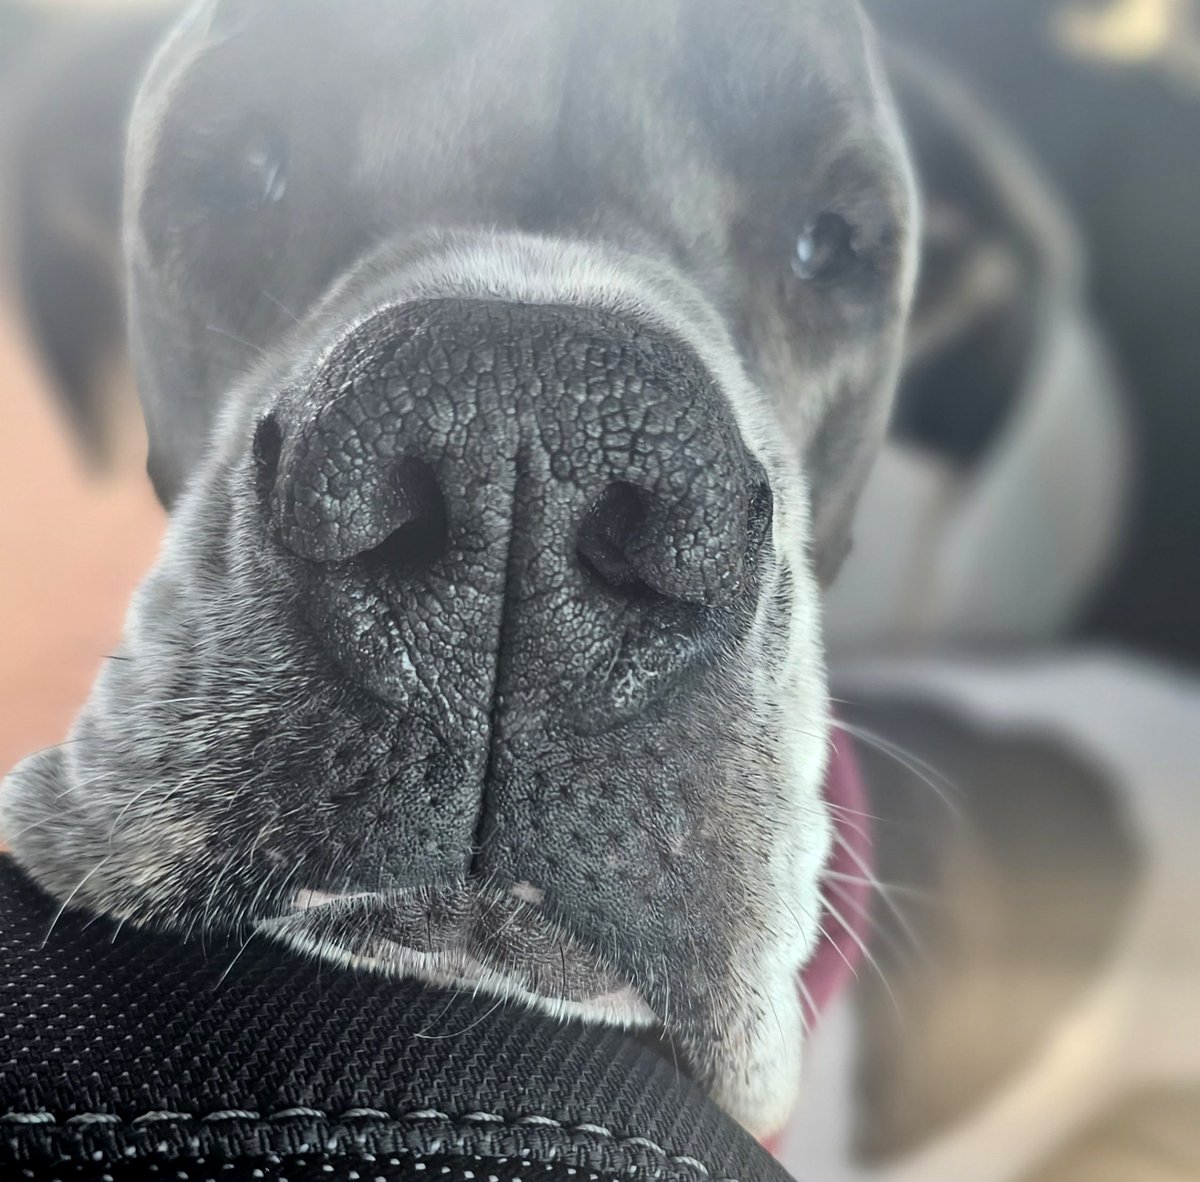 Can I get a Boop 🐽

#goodmorning #dognose #boop #boopthesnoot #dogsofx #dogsoftwitter  #boopmynose #dogs #doglife #GreatDane